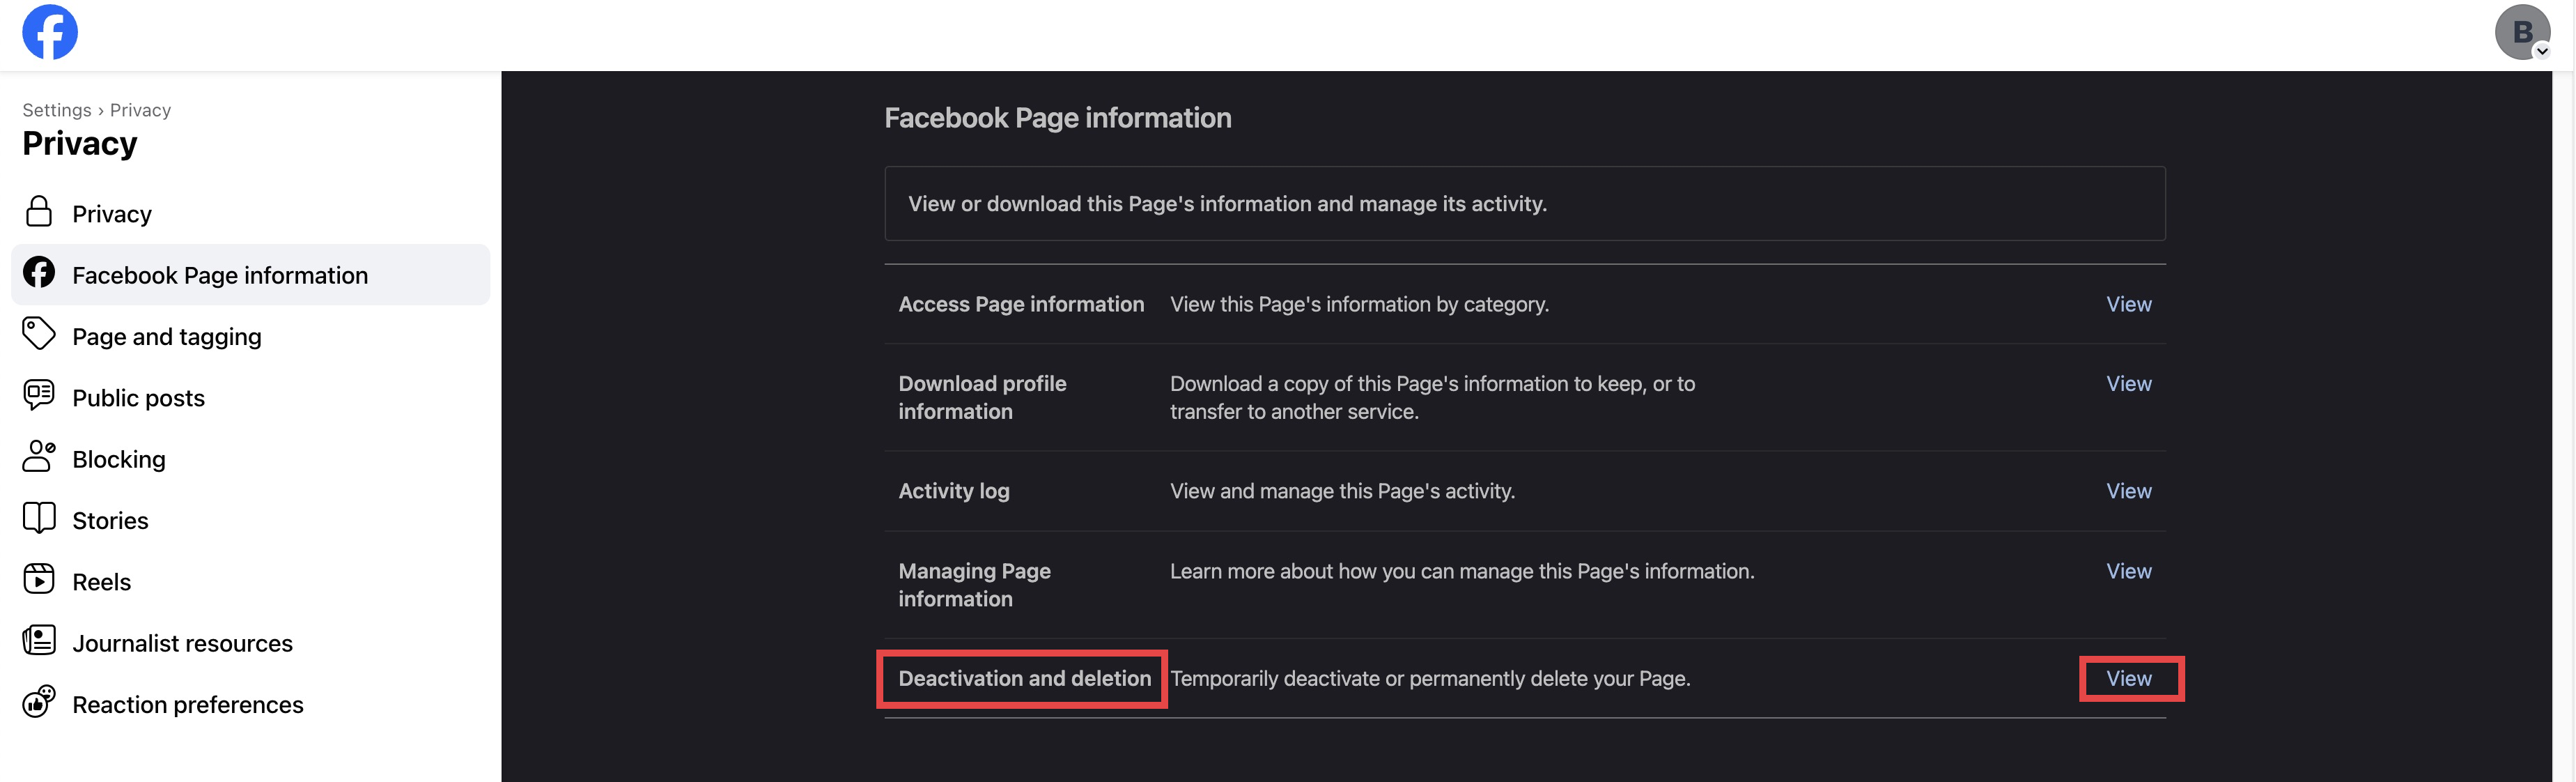 Screenshot of how to view the deactivation and deletion option for Facebook business pages